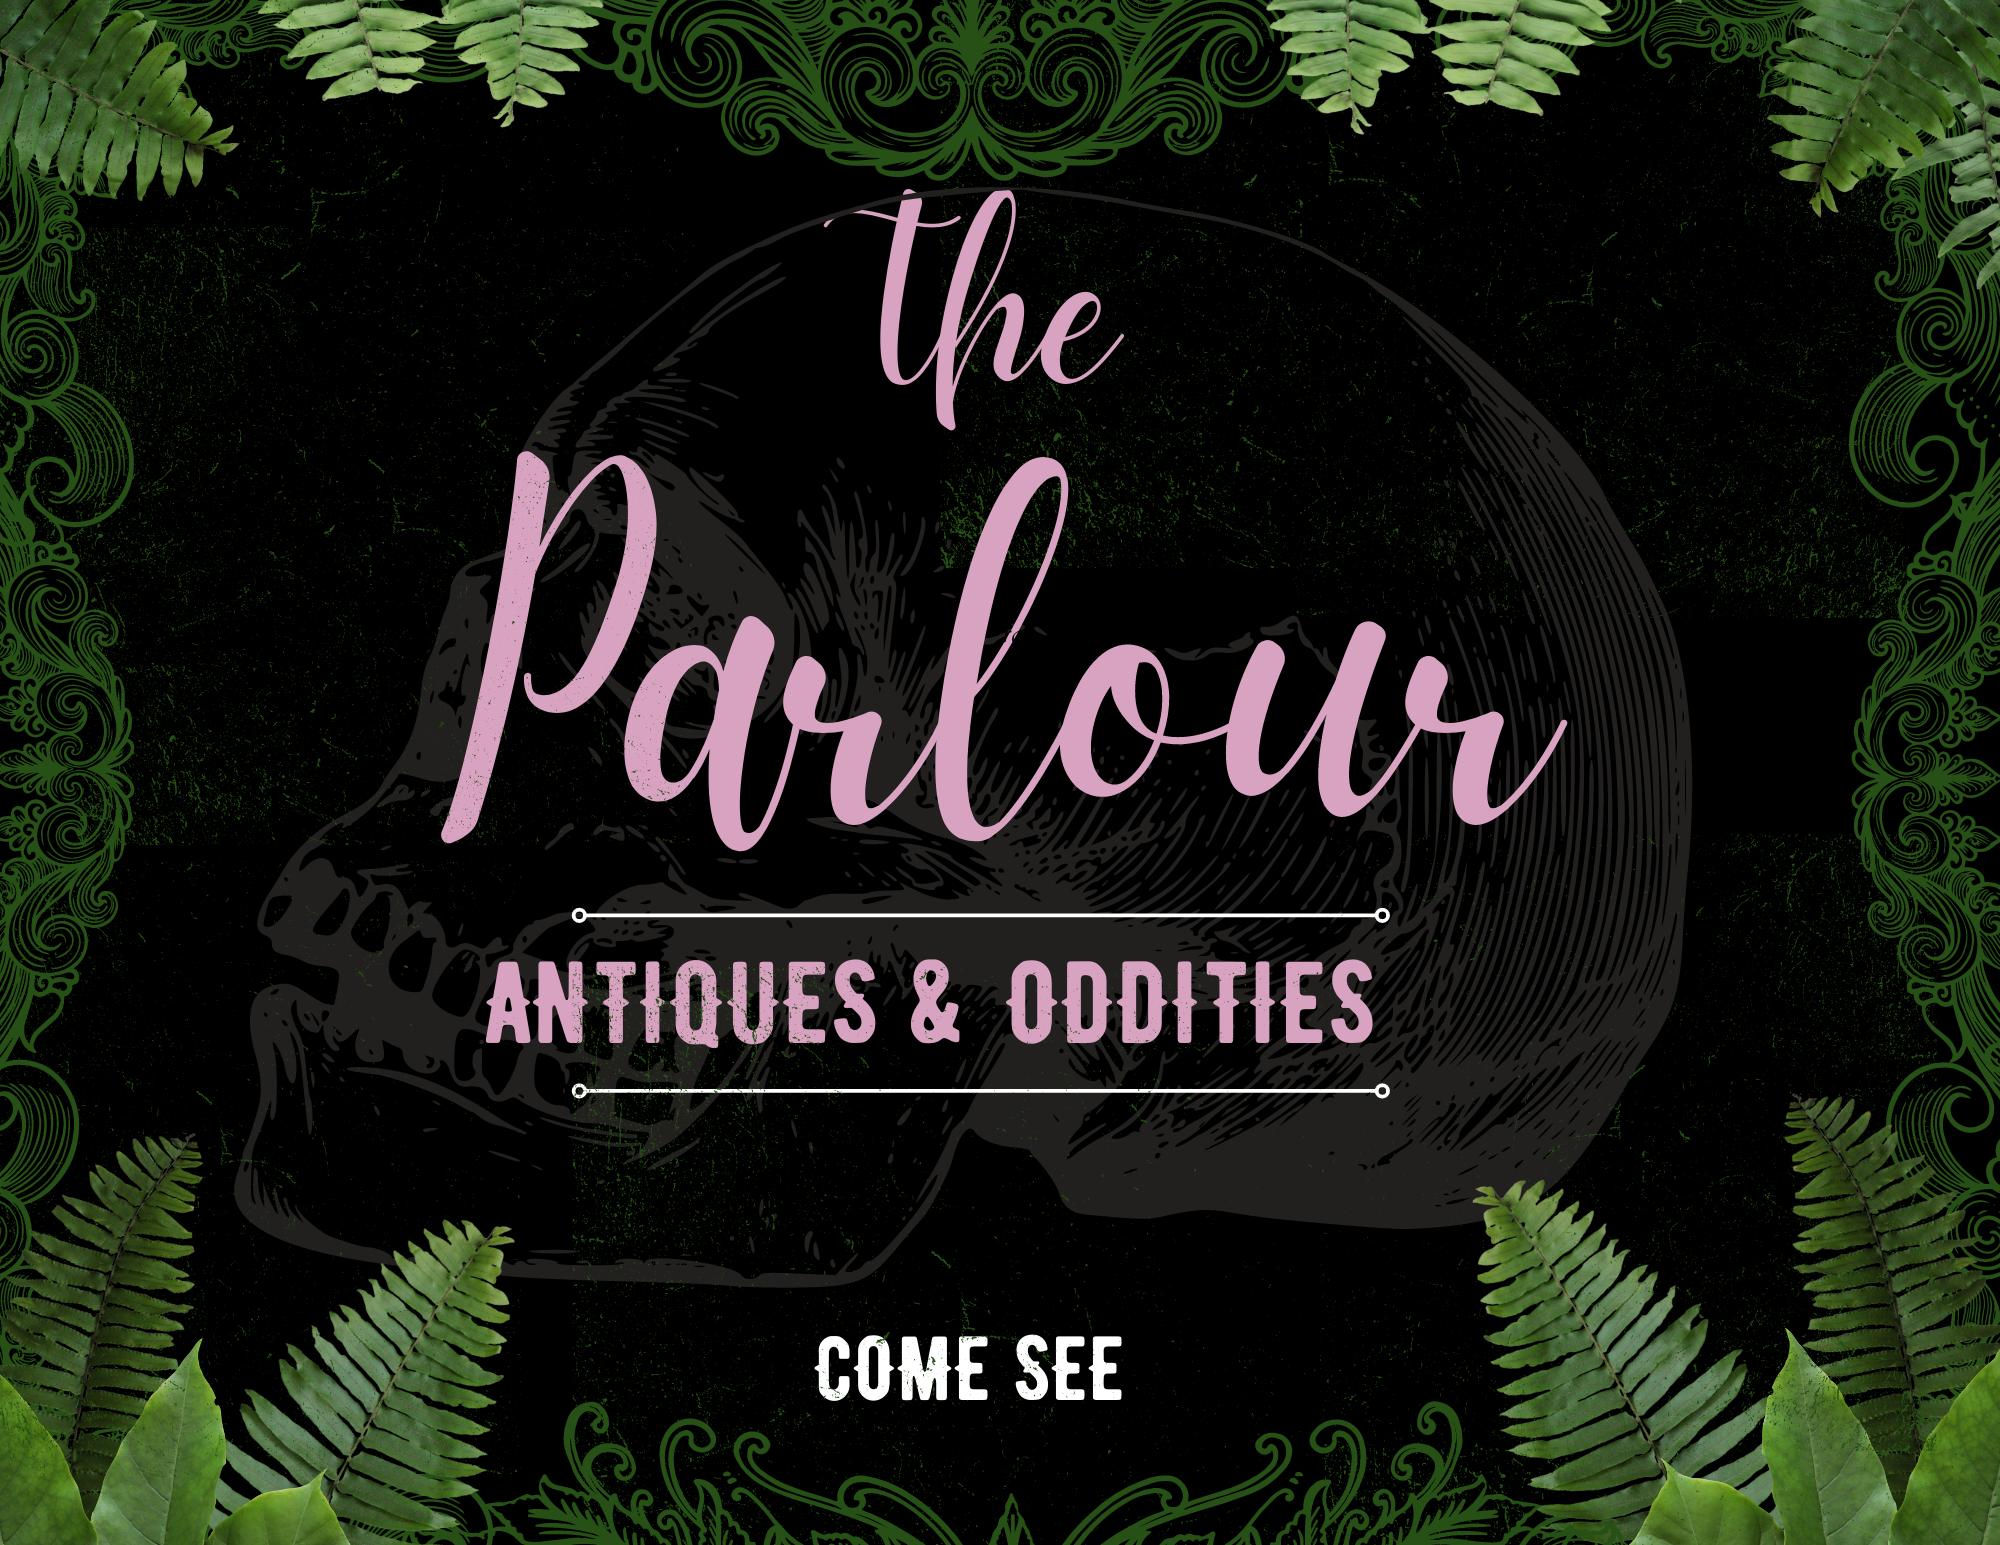 The Parlour Antiques & Oddities